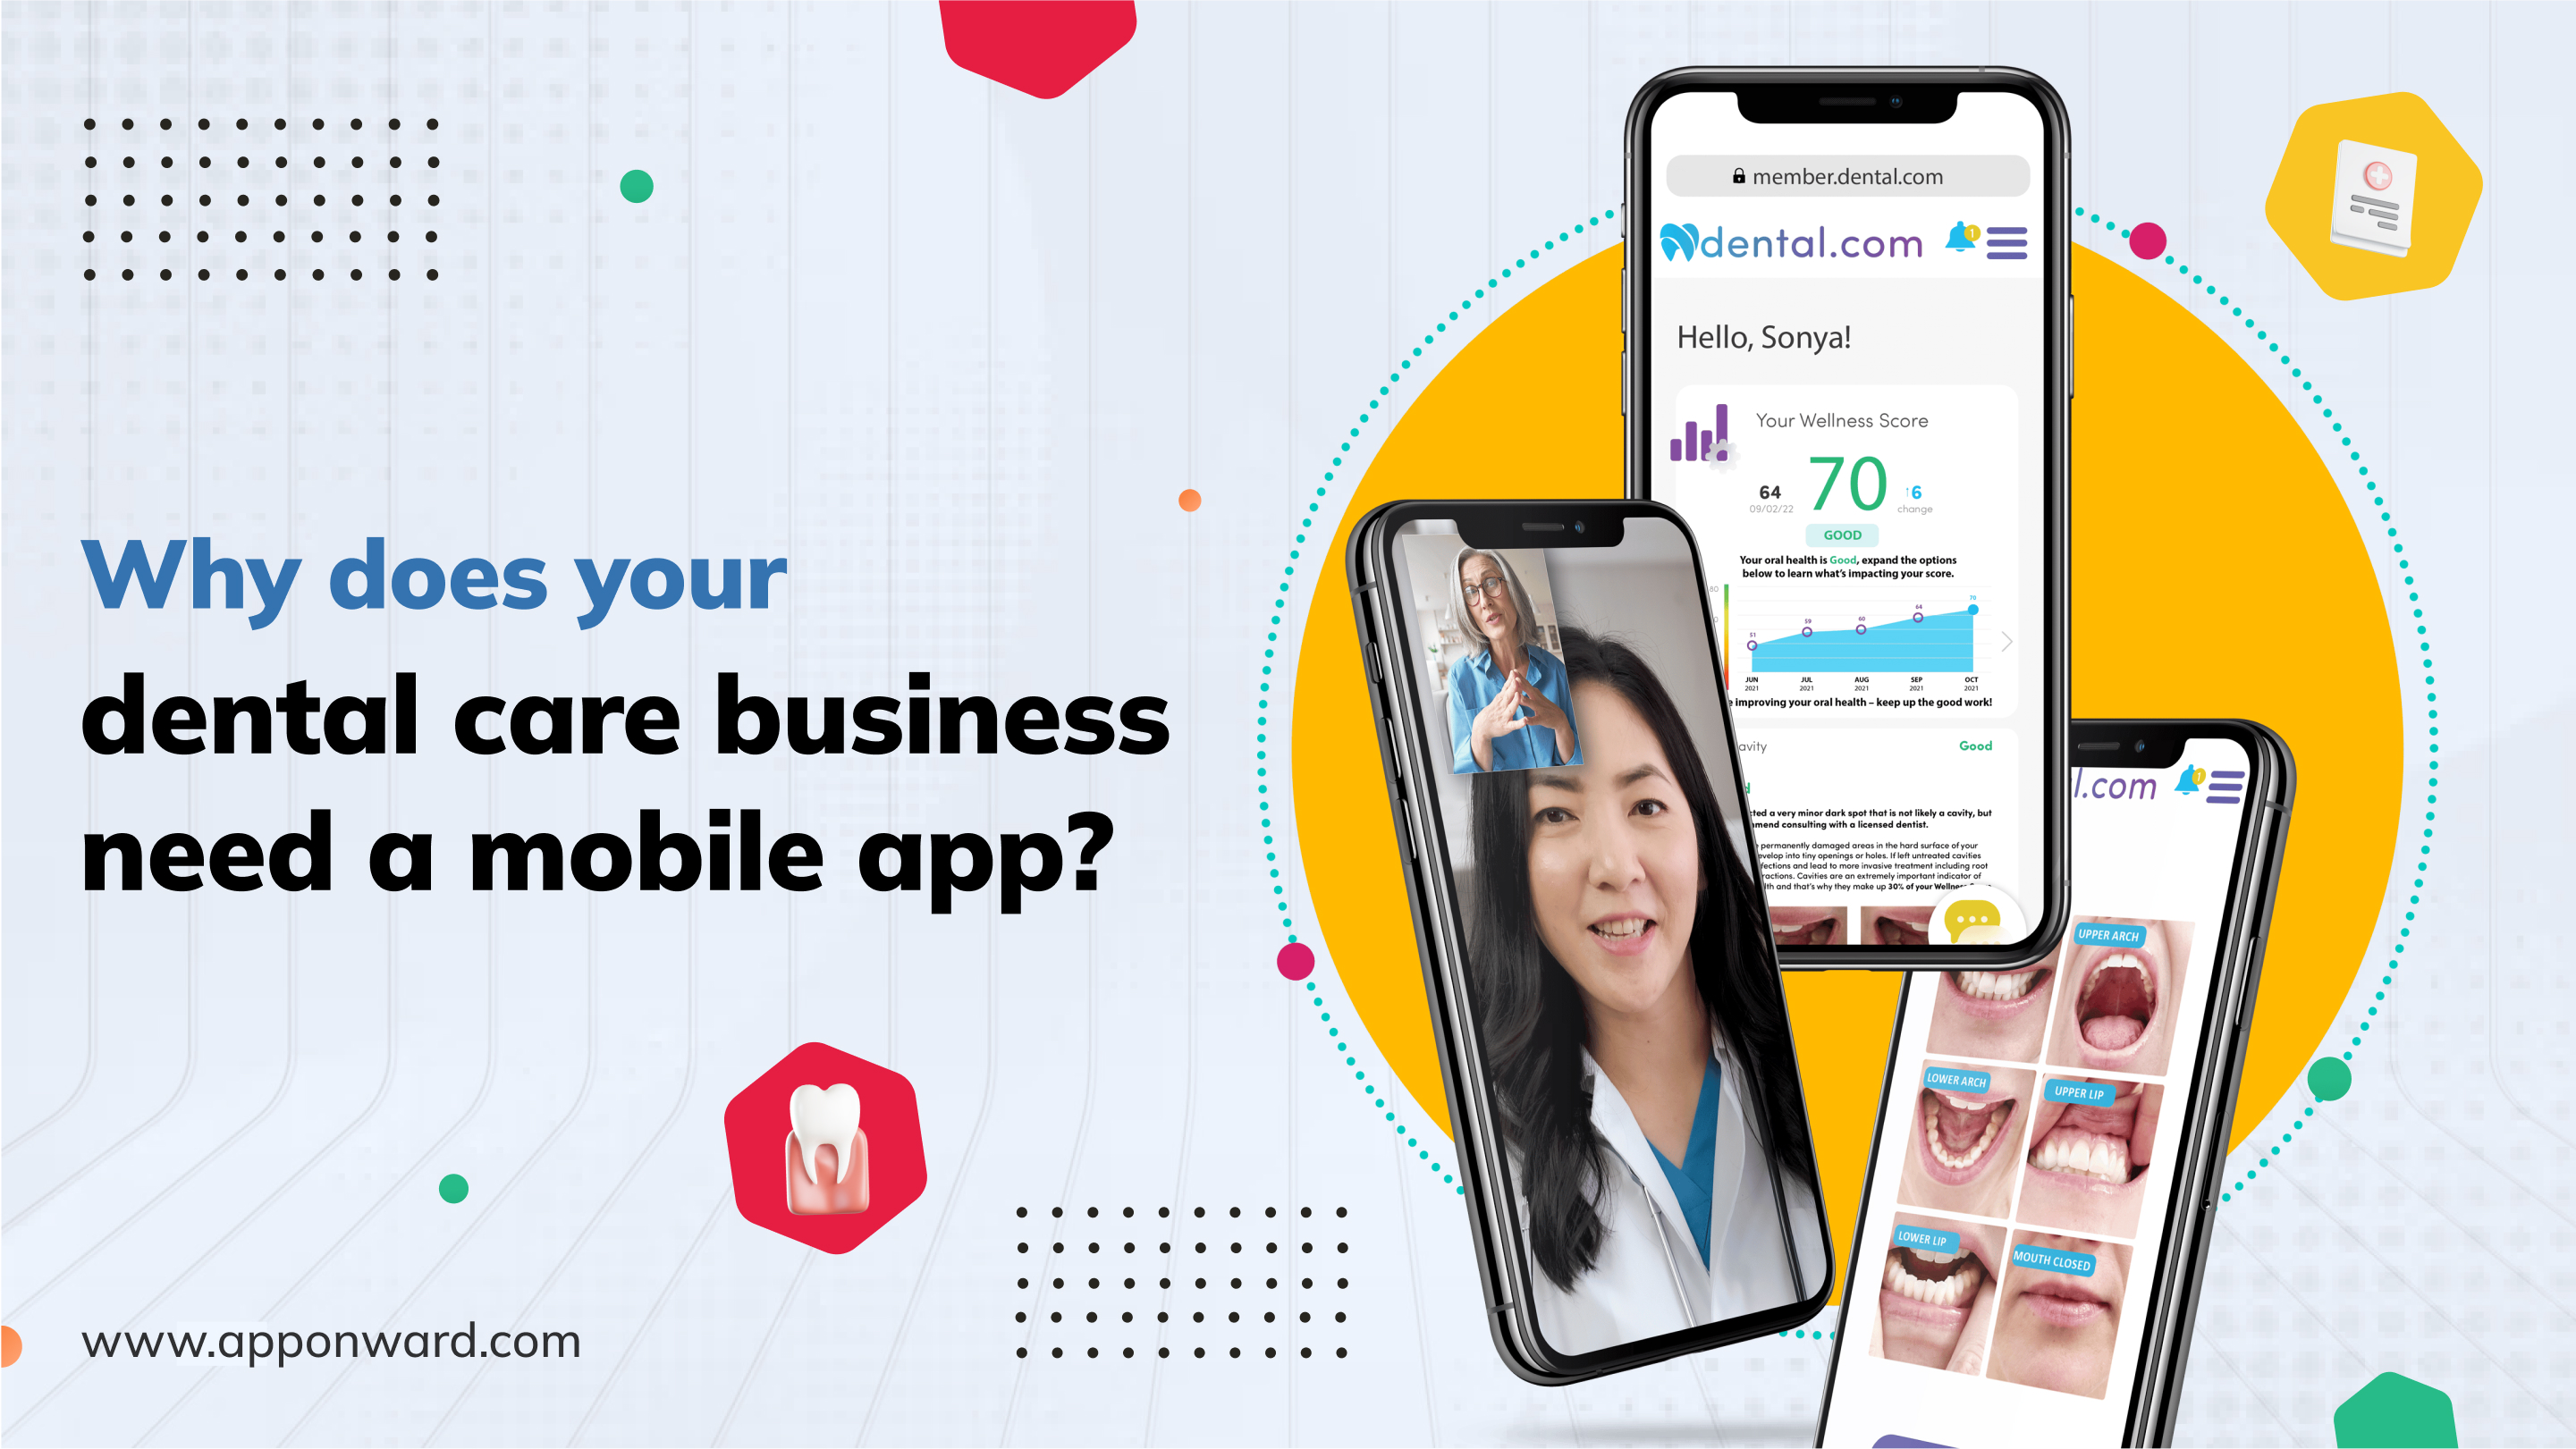 Why does your dental care business need a mobile app?